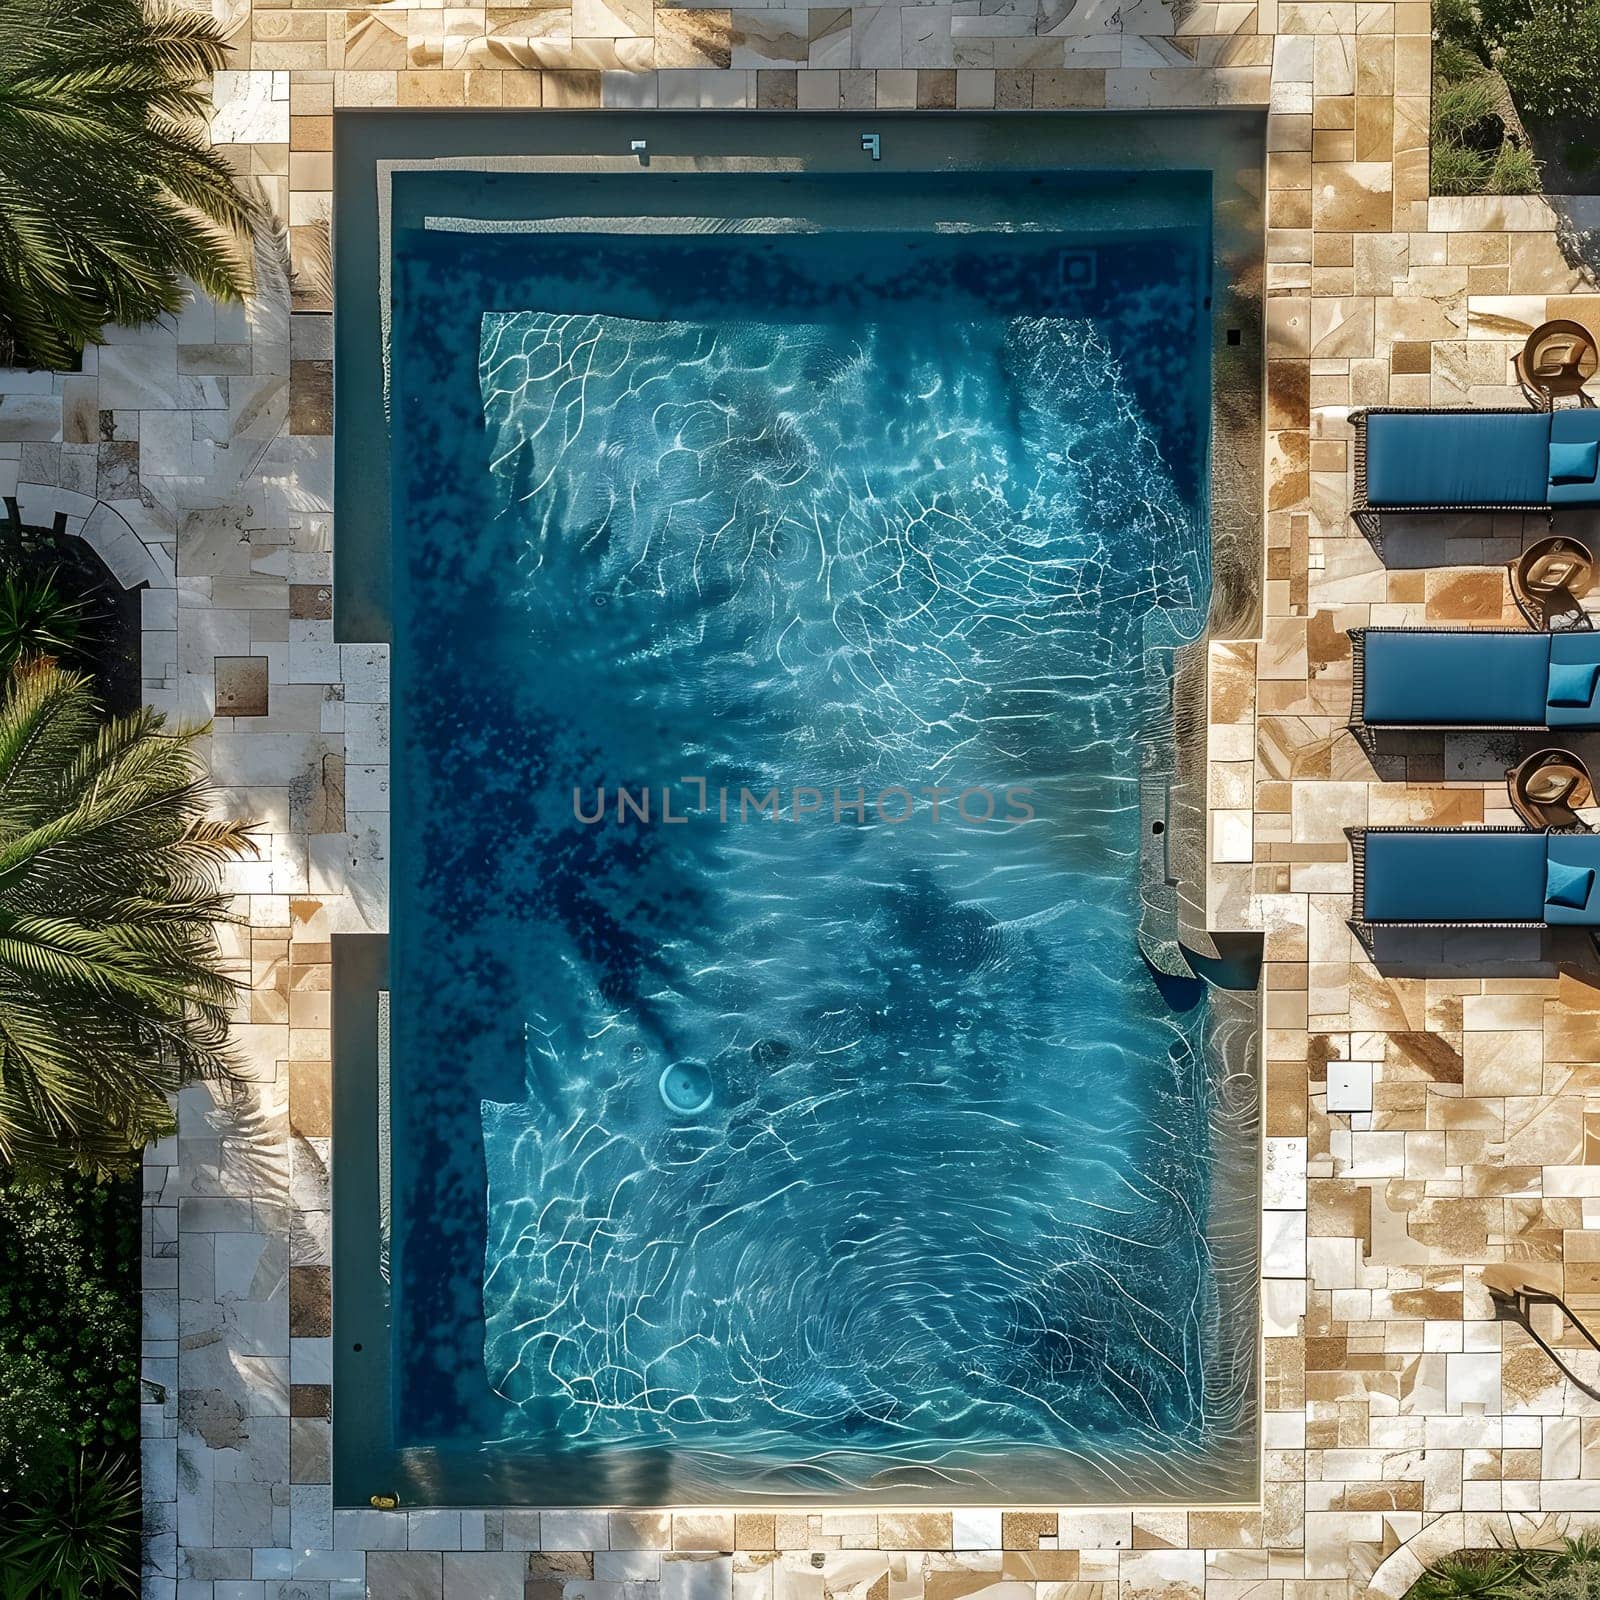 An aerial view of a massive rectangle pool with azure water, surrounded by green plants and wooden facade, creating a tranquil oasis